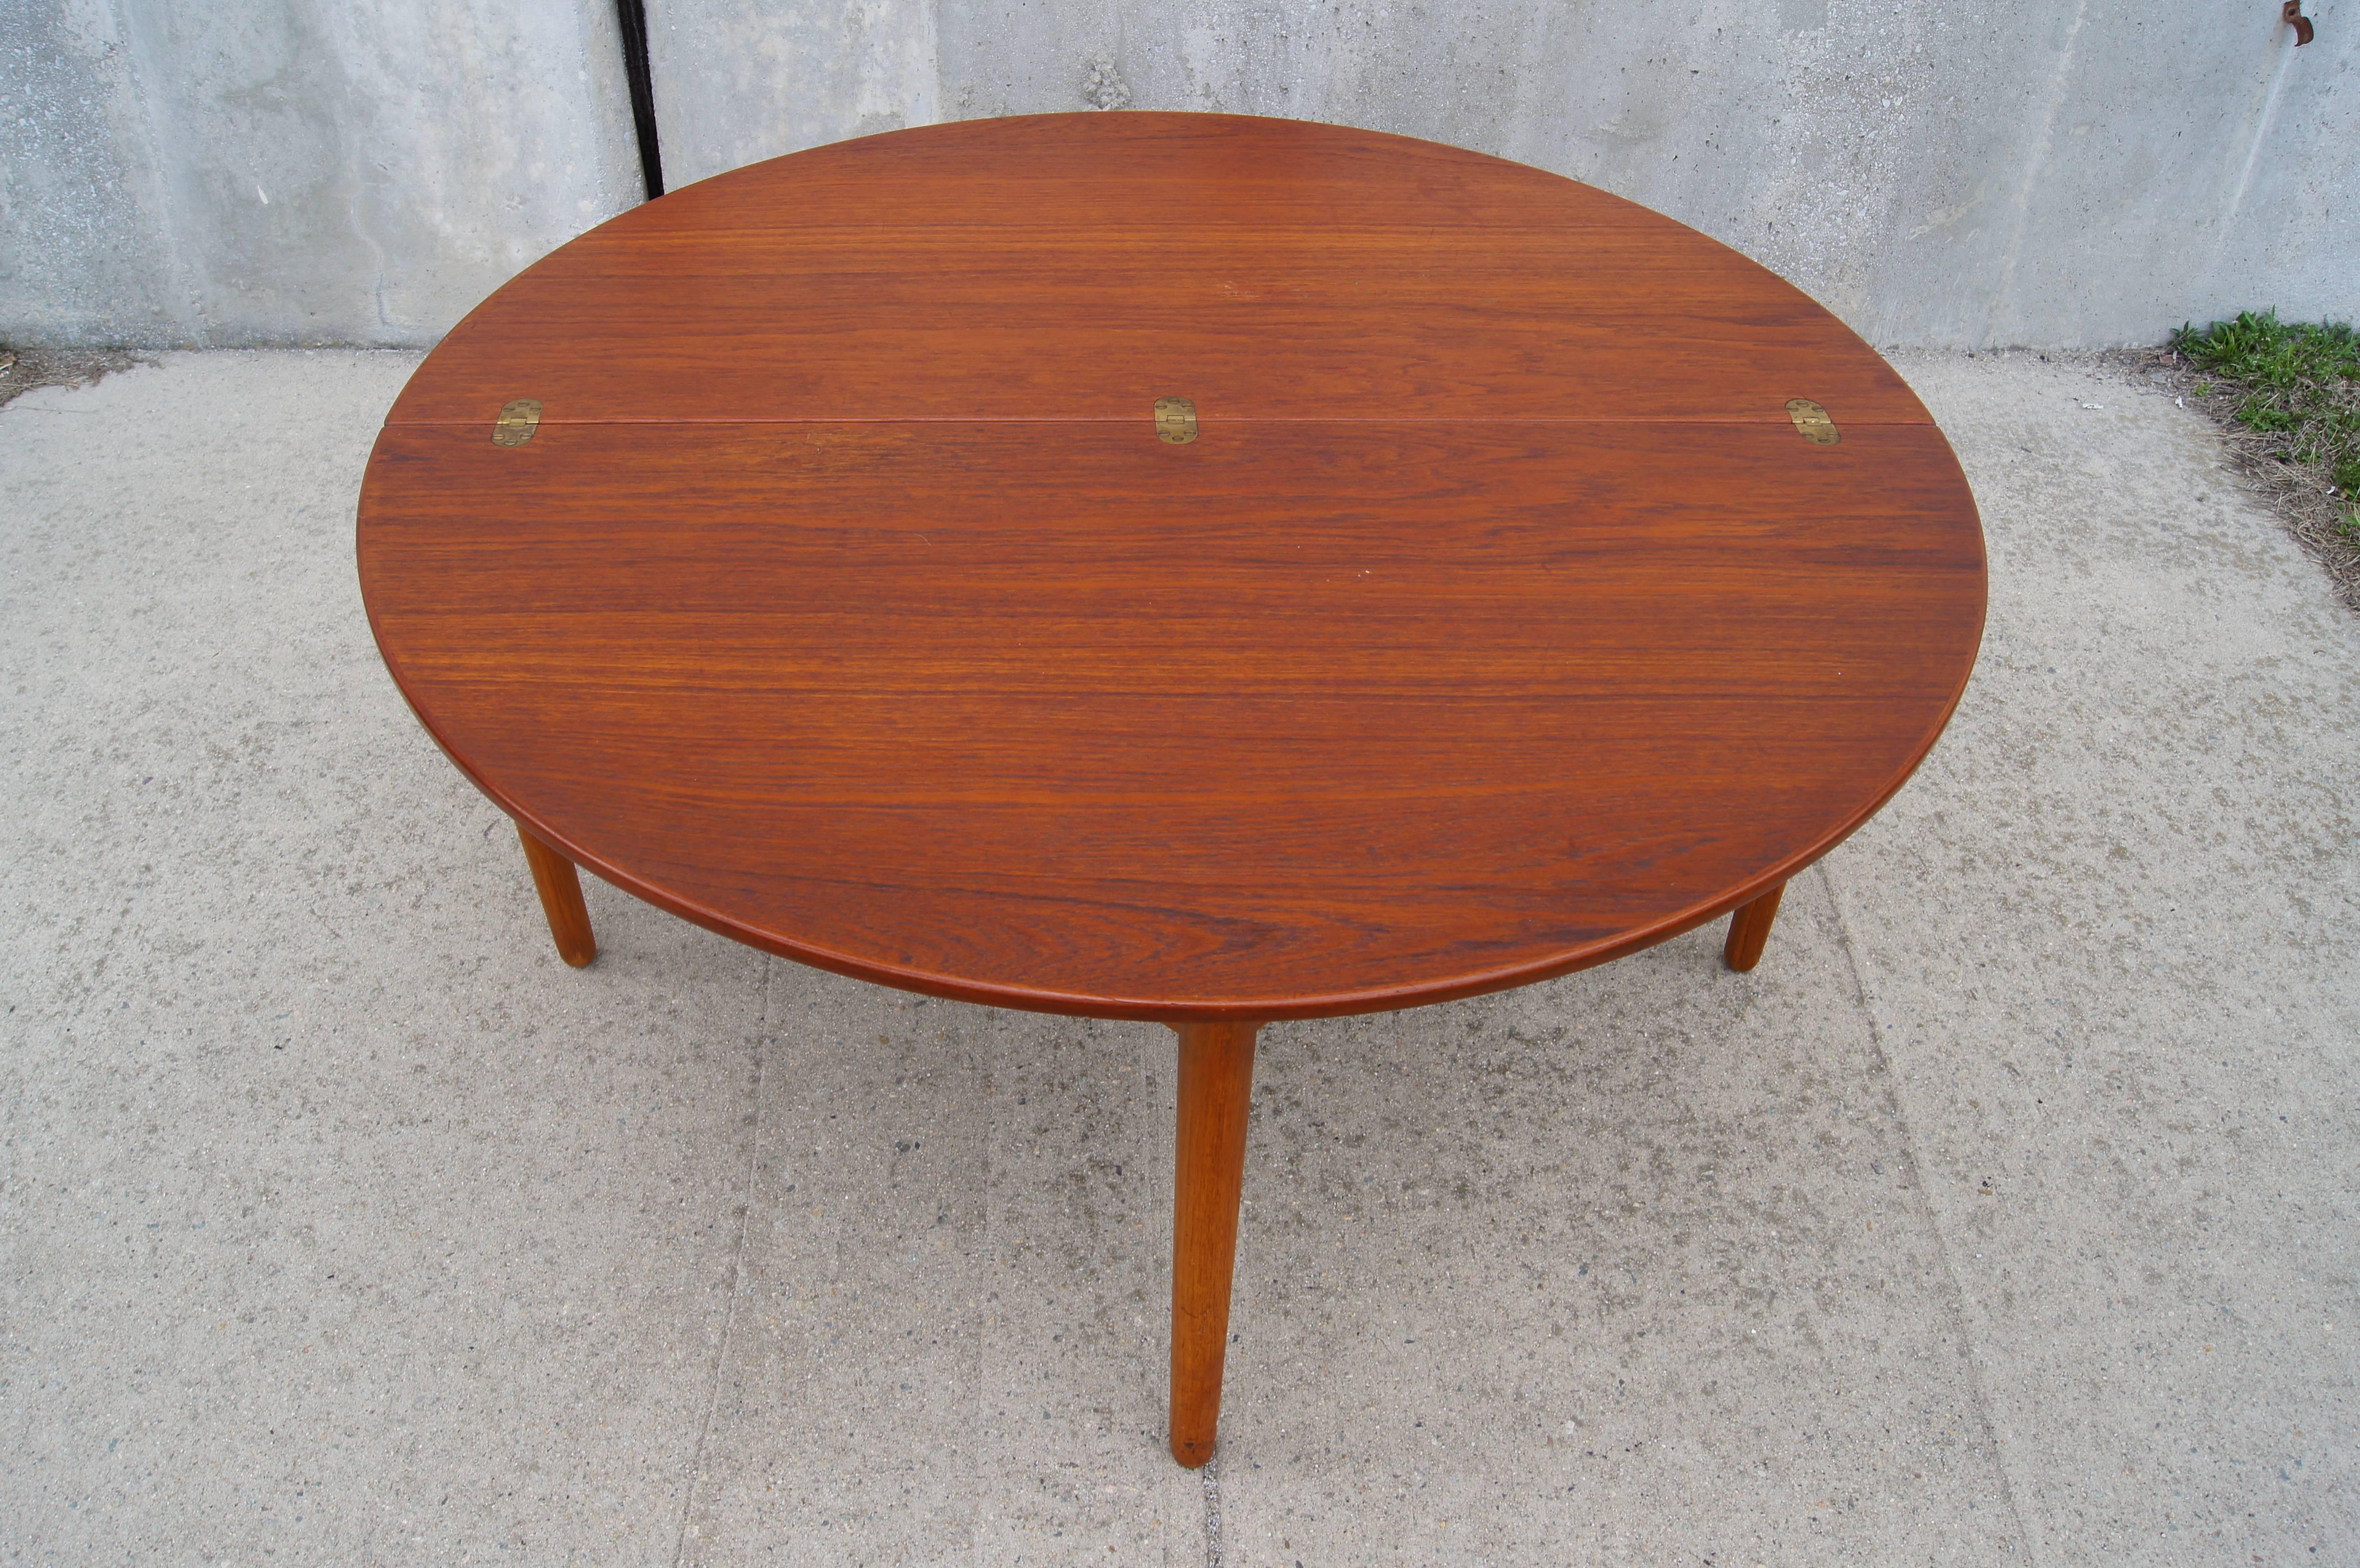 Paul Volther designed this round teak coffee table for the Danish company Frem Røjle in 1956. The hinged top folds over and a leg tucks away to create a demilune table perfect when a smaller footprint is desired.